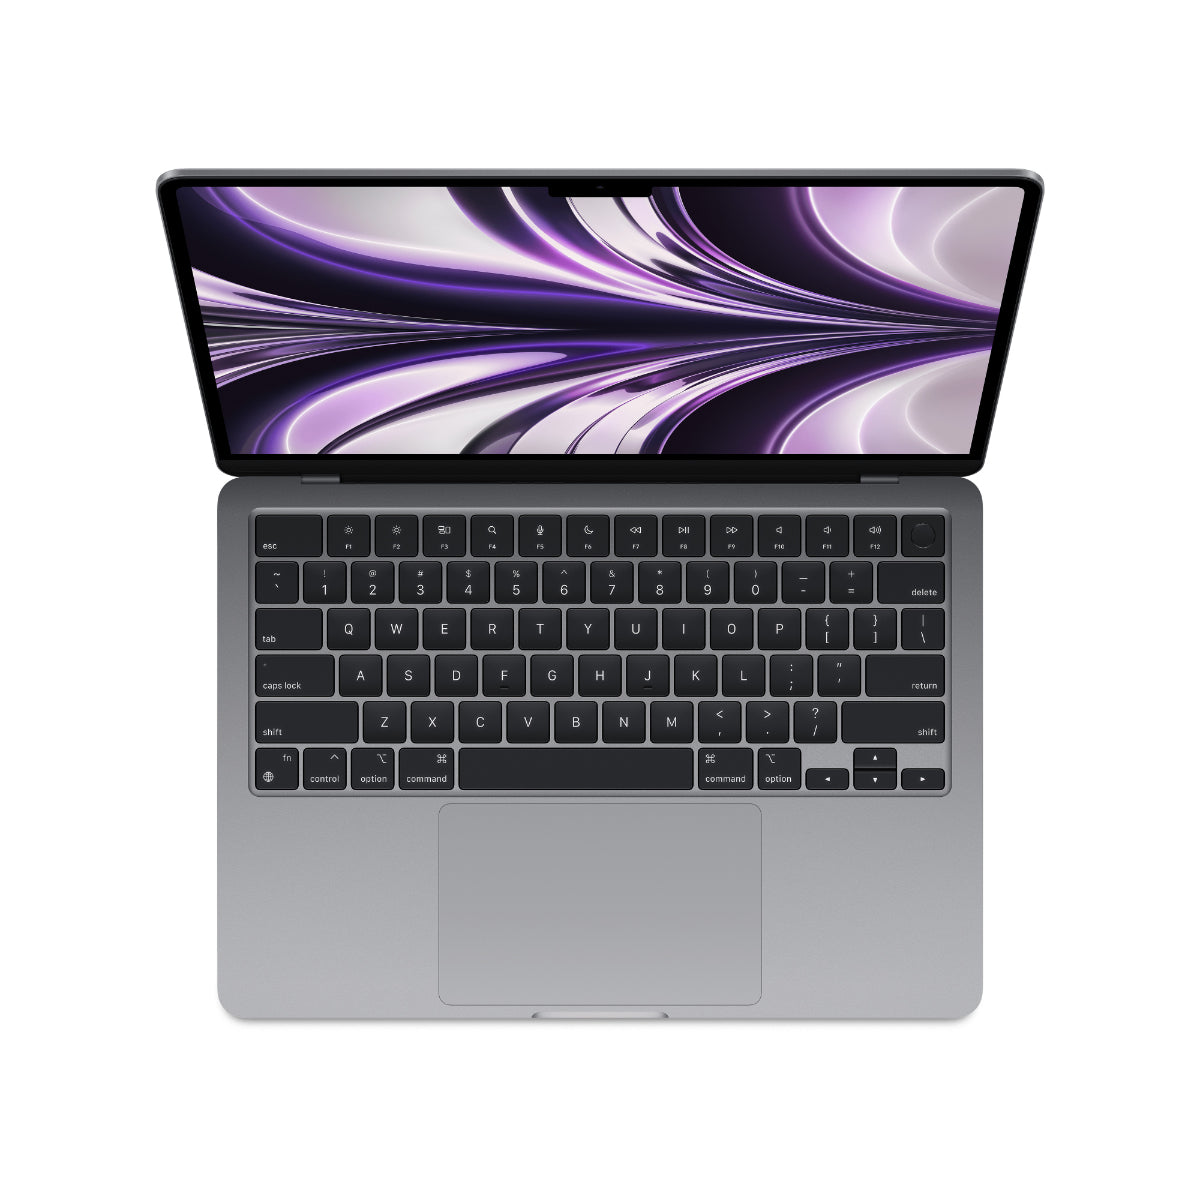 13-Inch MacBook Air: Apple M2 Chip with 8-Core CPU and 10-Core GPU, 512GB SSD - Space Grey